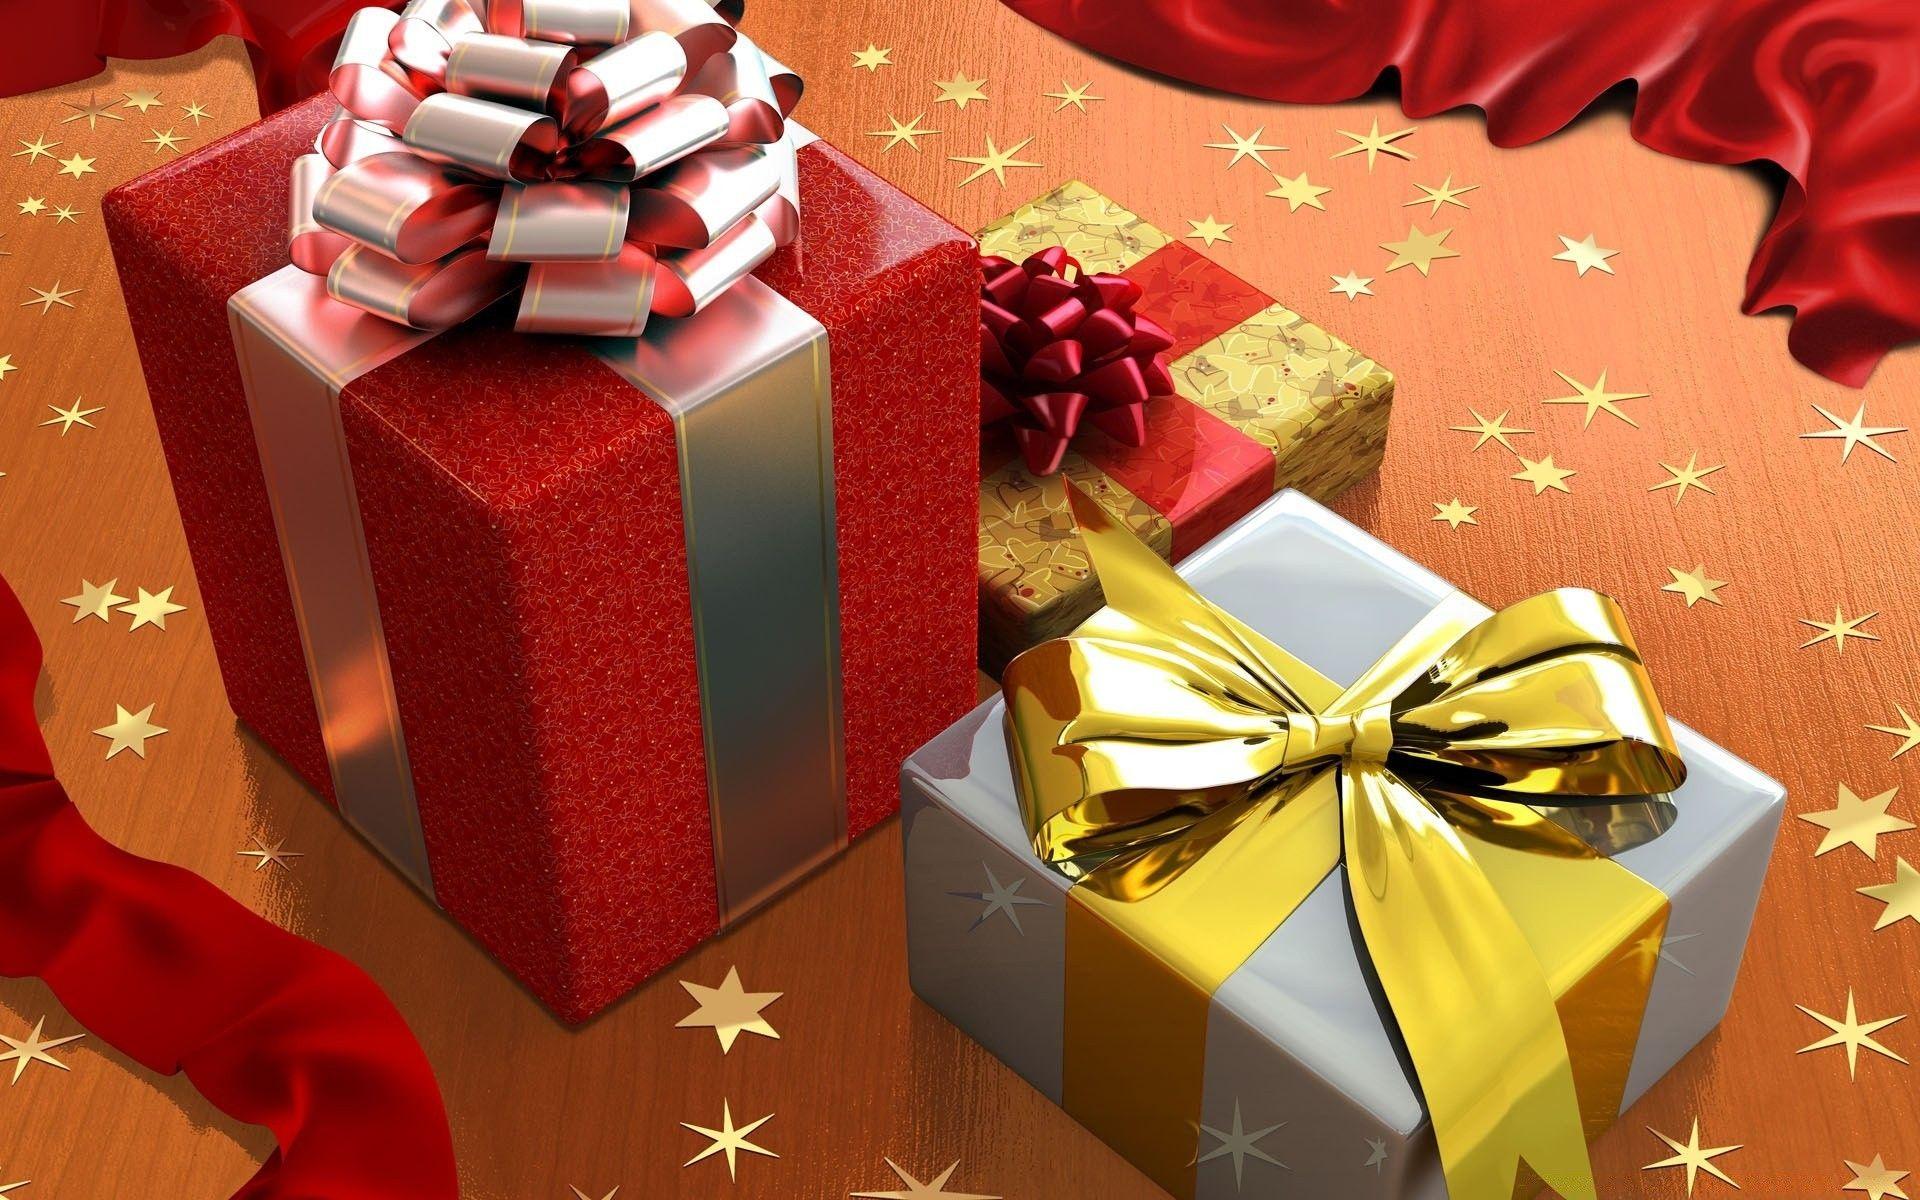 Christmas Presents. Android wallpaper for free